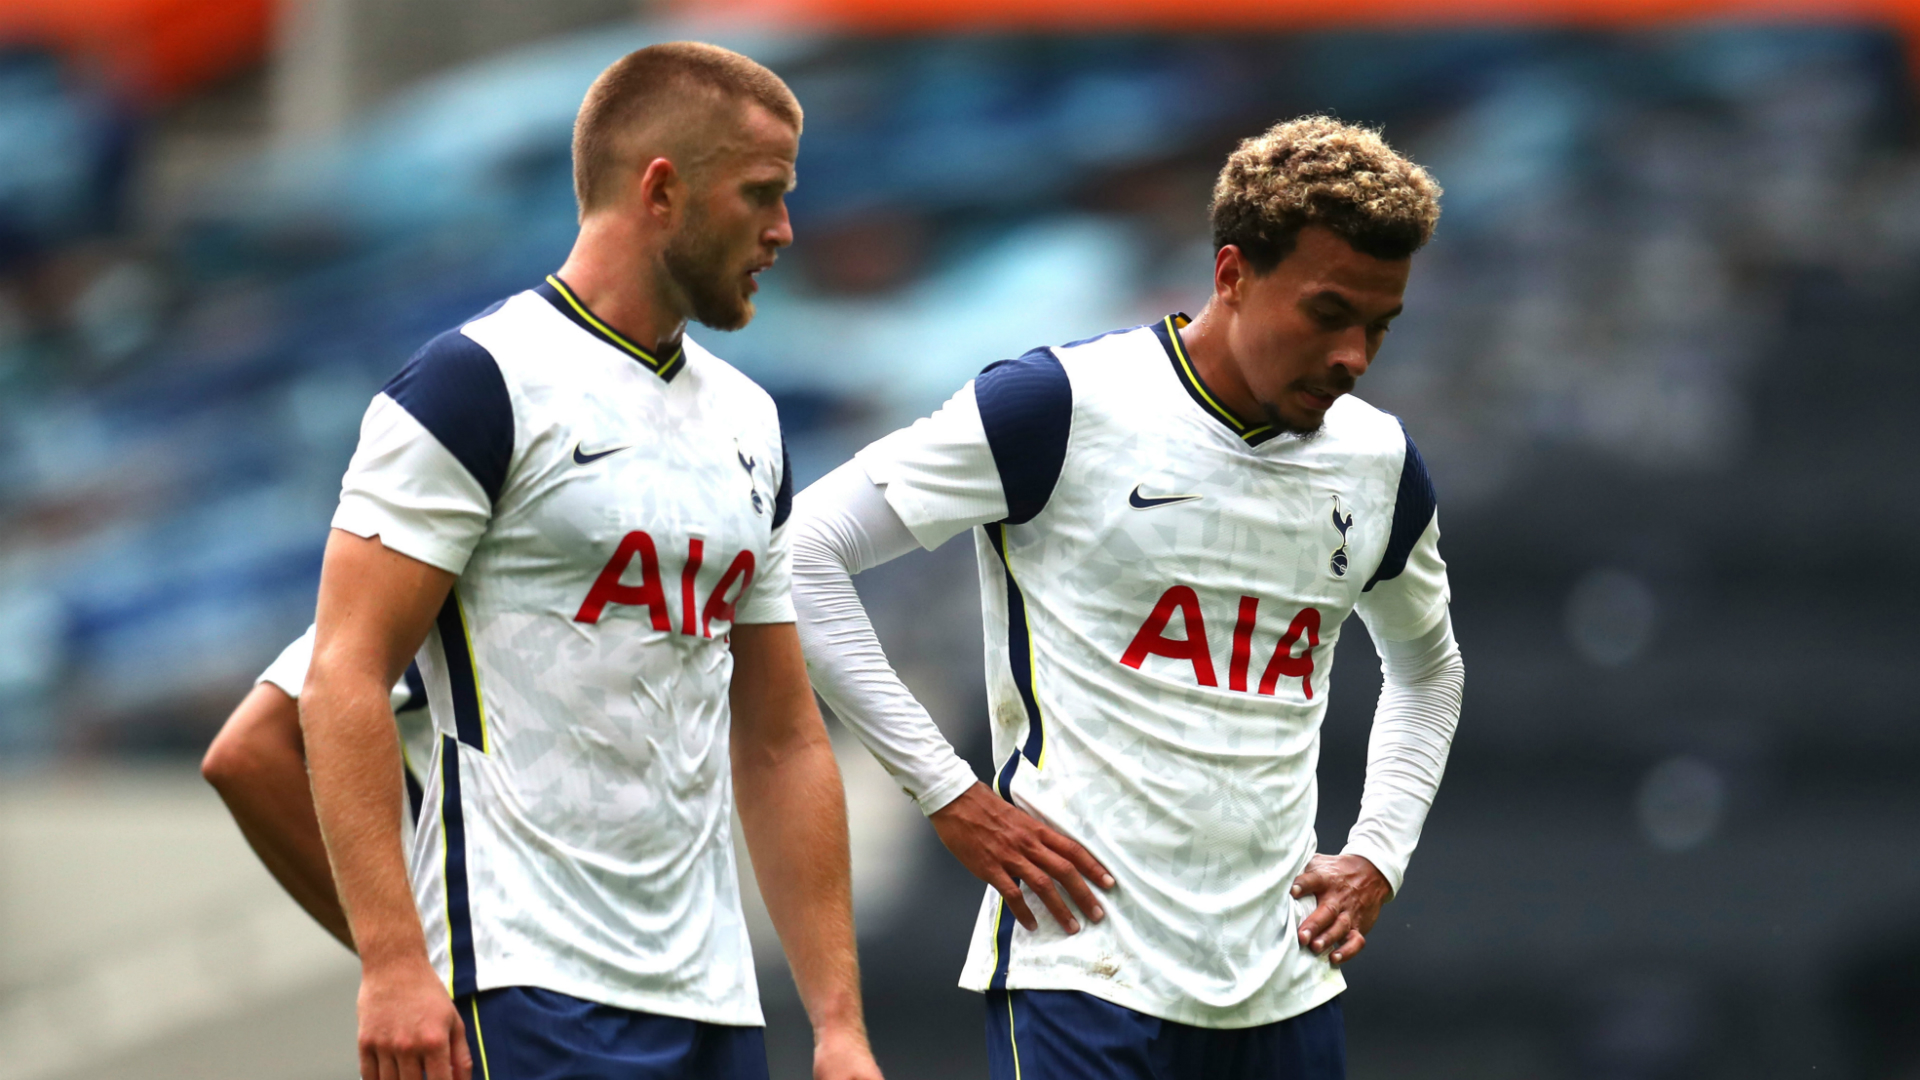 Tottenham Hotspur man Eric Dier says he wished he did more to help Dele Alli overcome his mental struggles. 